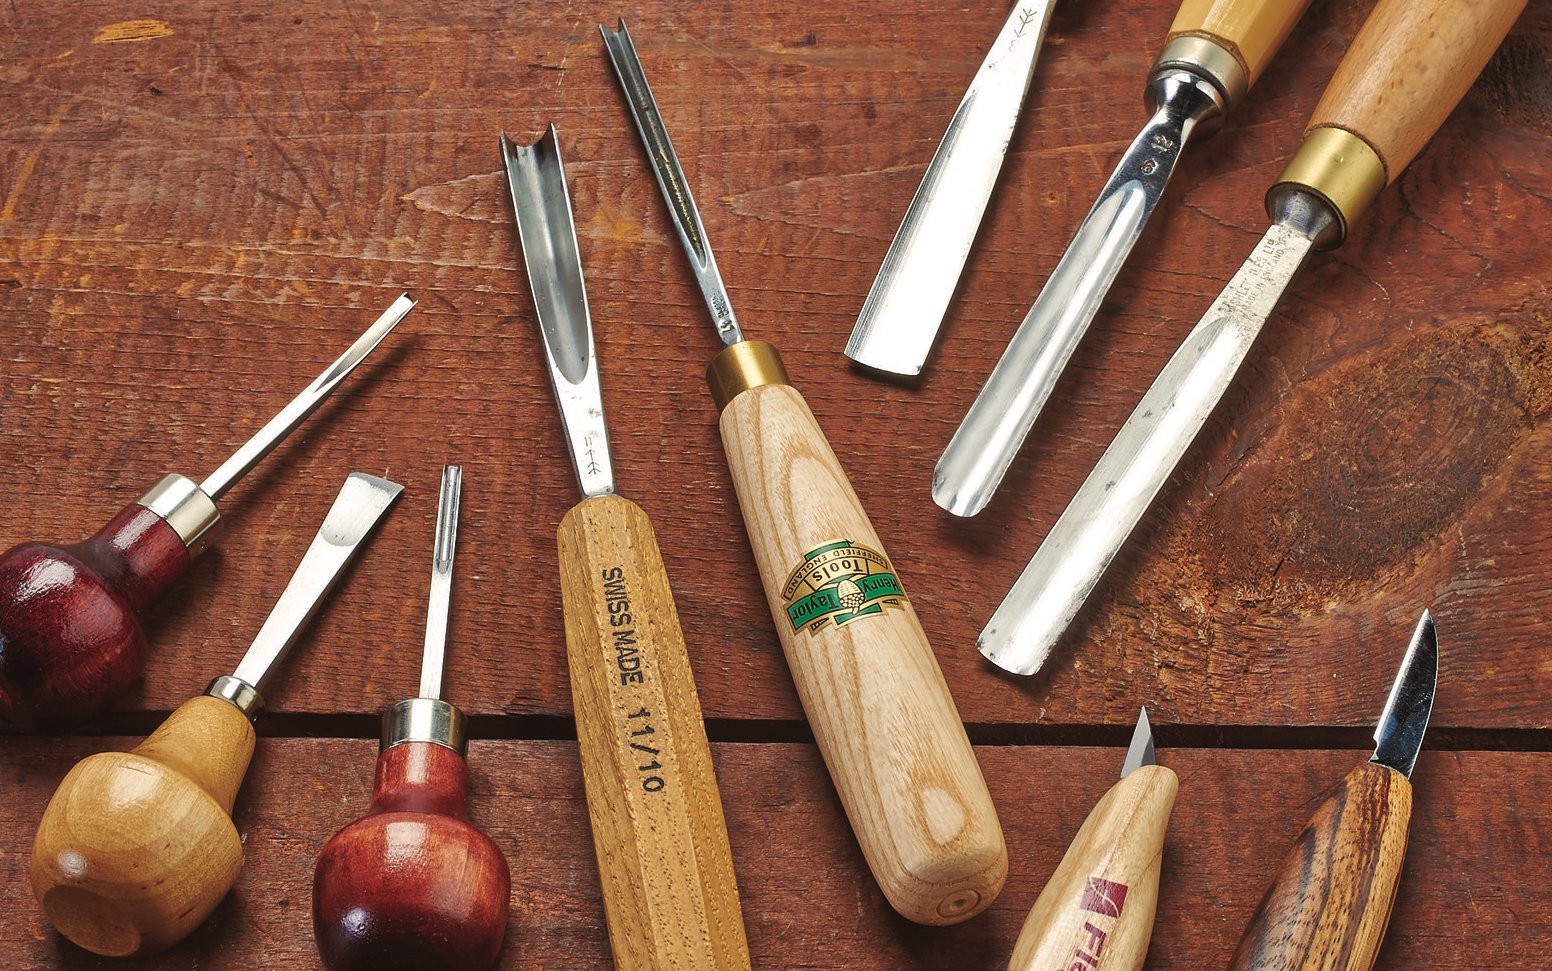 The ultimate guide to choosing the right wood carving chisels